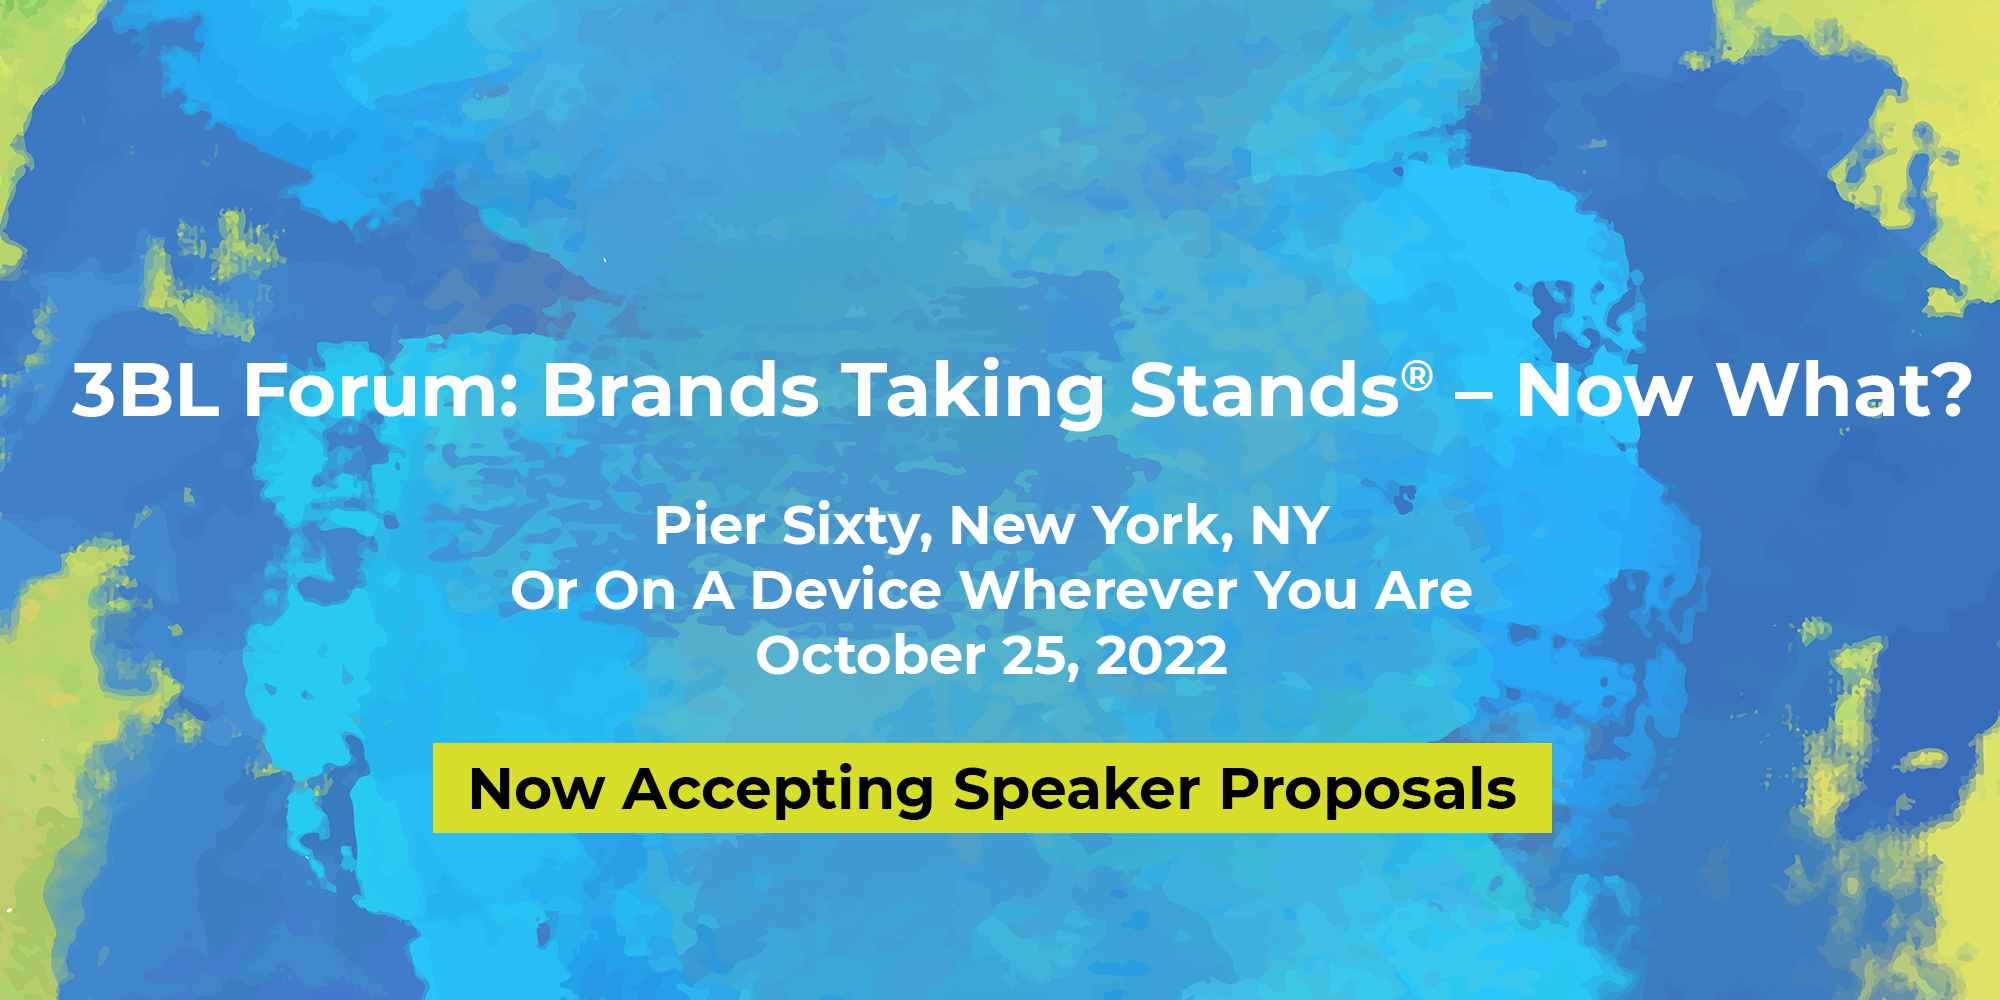 3BL Forum: Brands Taking Stands® –Now What? Pier Sixty New York, NY Or on a Device wherever you are. October 25, 2022. Now accepting Speaker Proposals.